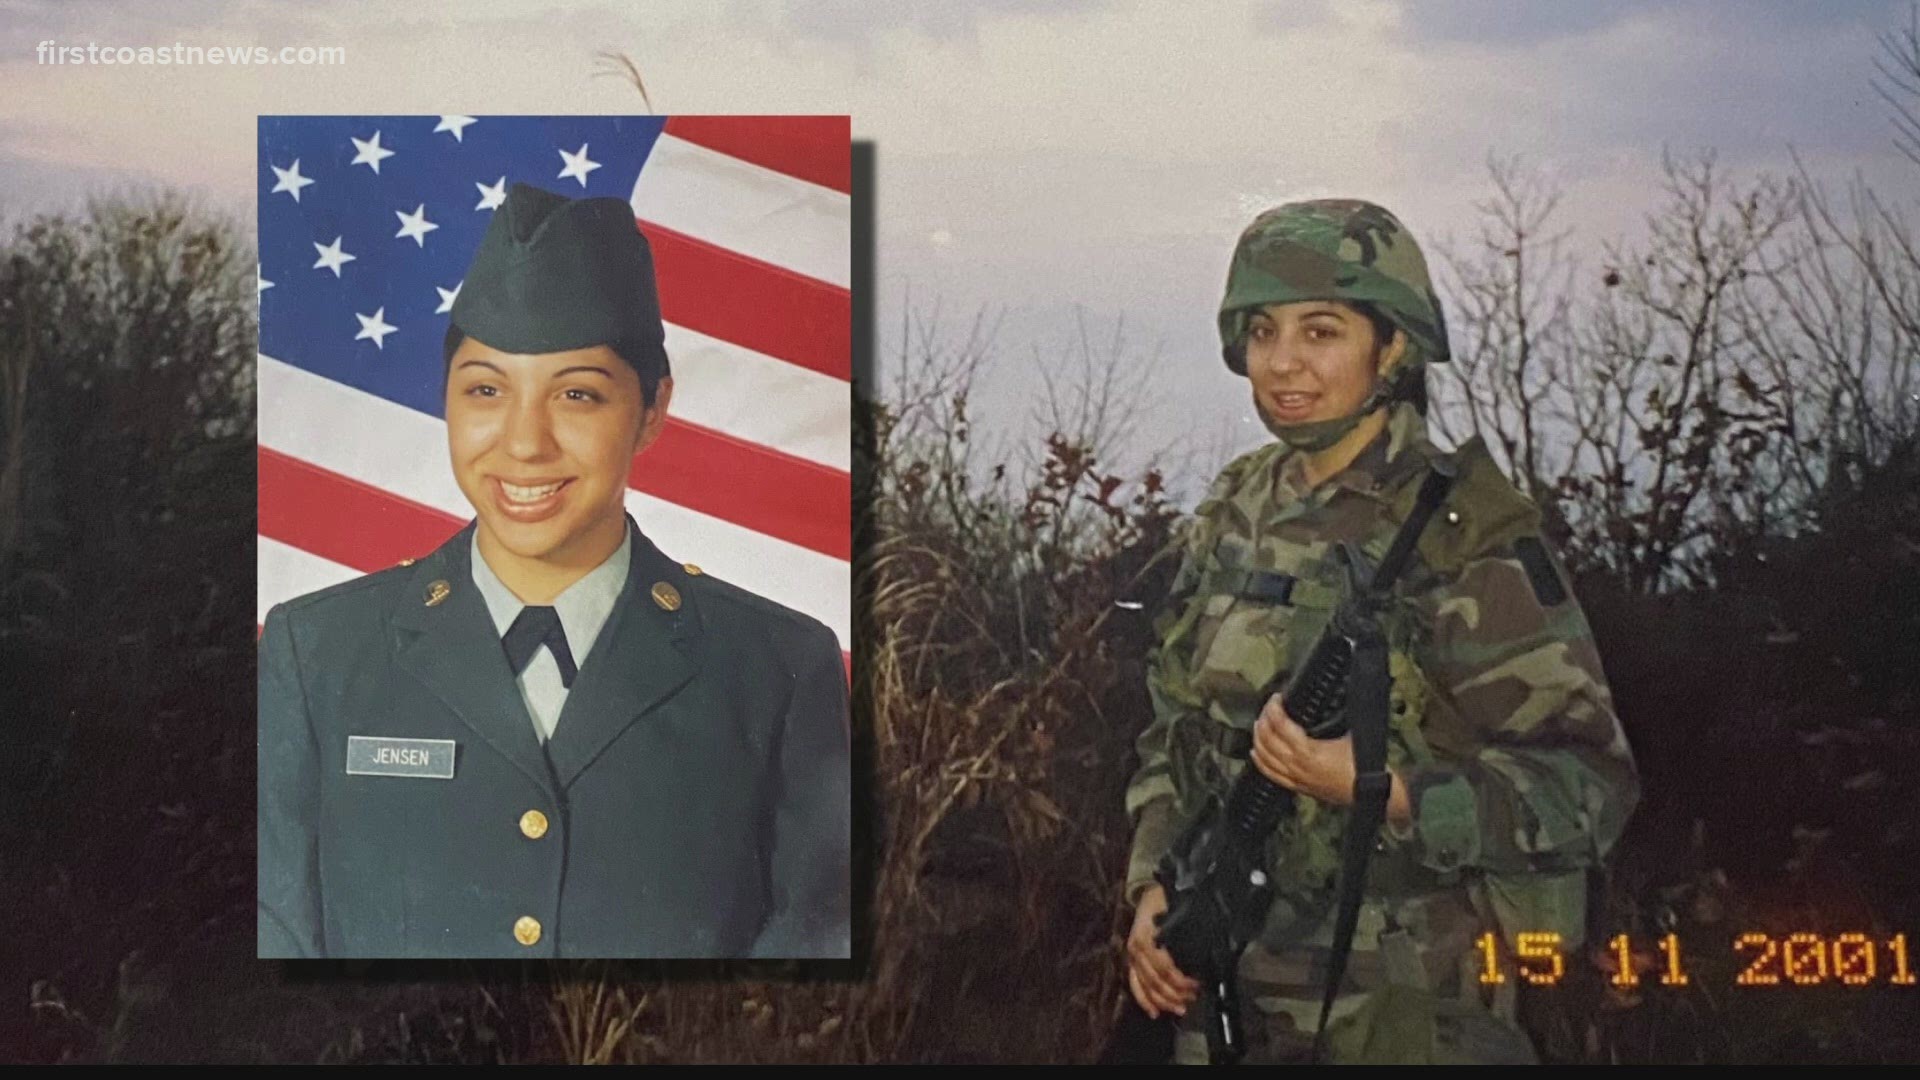 The Military Women's Memorial wants to record the stories of every woman who served or continues to serve our country. They need your help locating them.